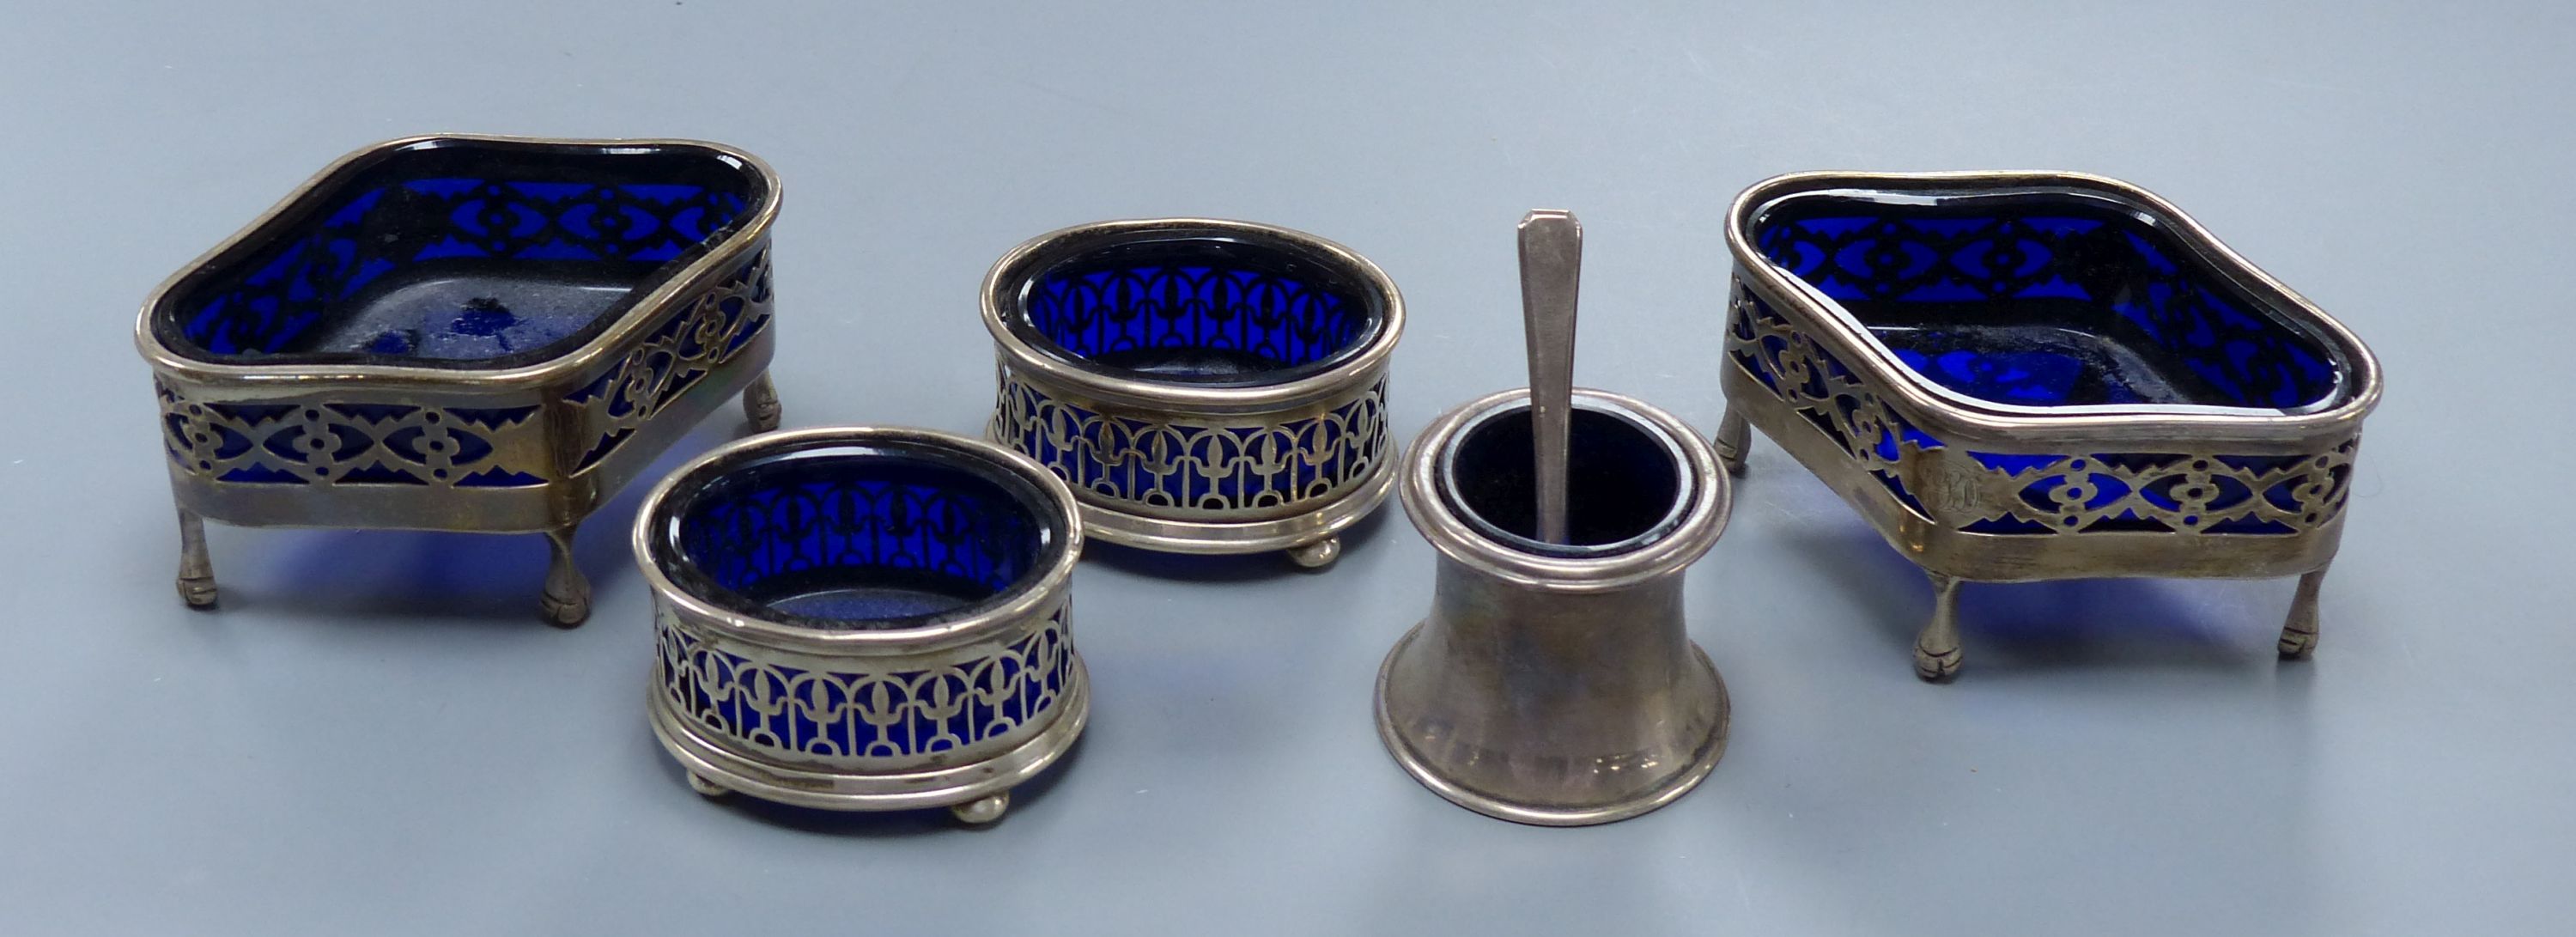 A pair of Edwardian pierced silver quatrefoil shaped salts with blue glass liners, London, 190987mm and three other smaller silver salts.